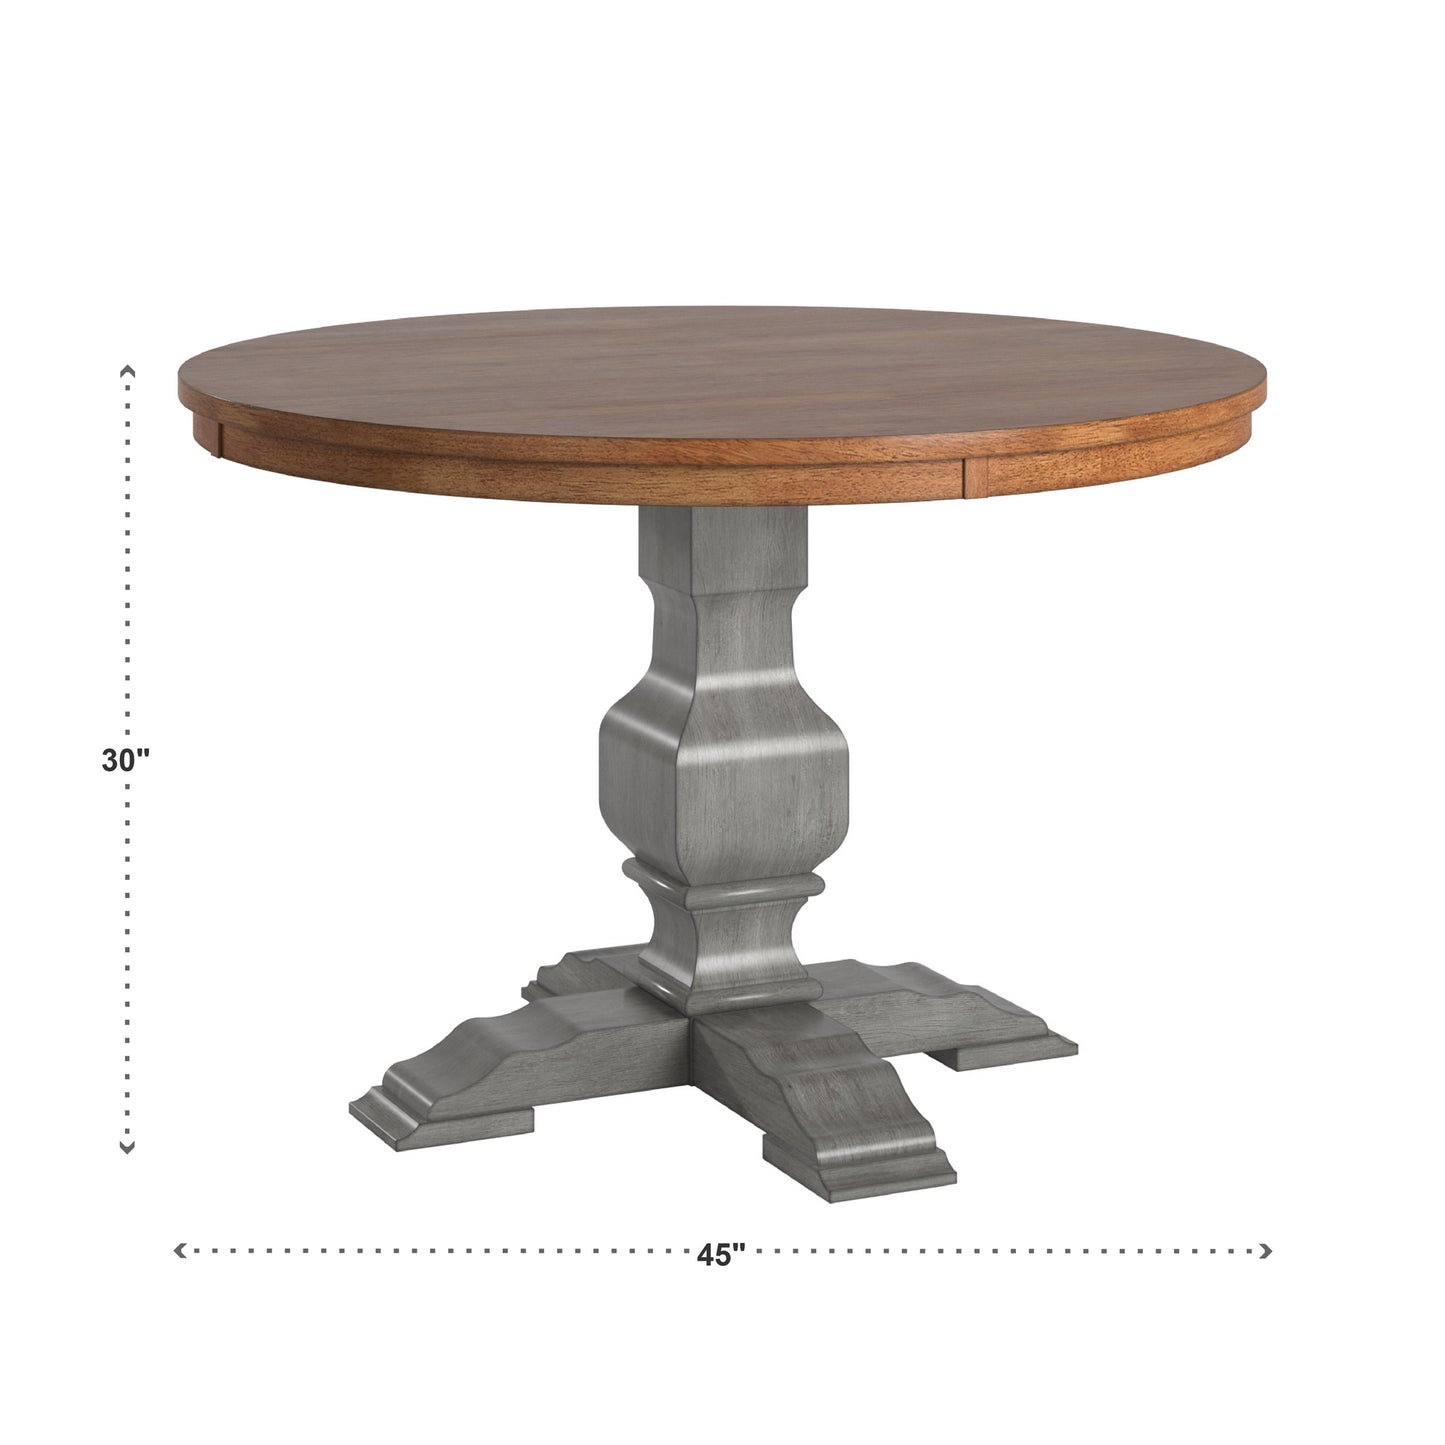 Two-Tone Round Solid Wood Top Dining Table - Oak Top with Antique Grey Base